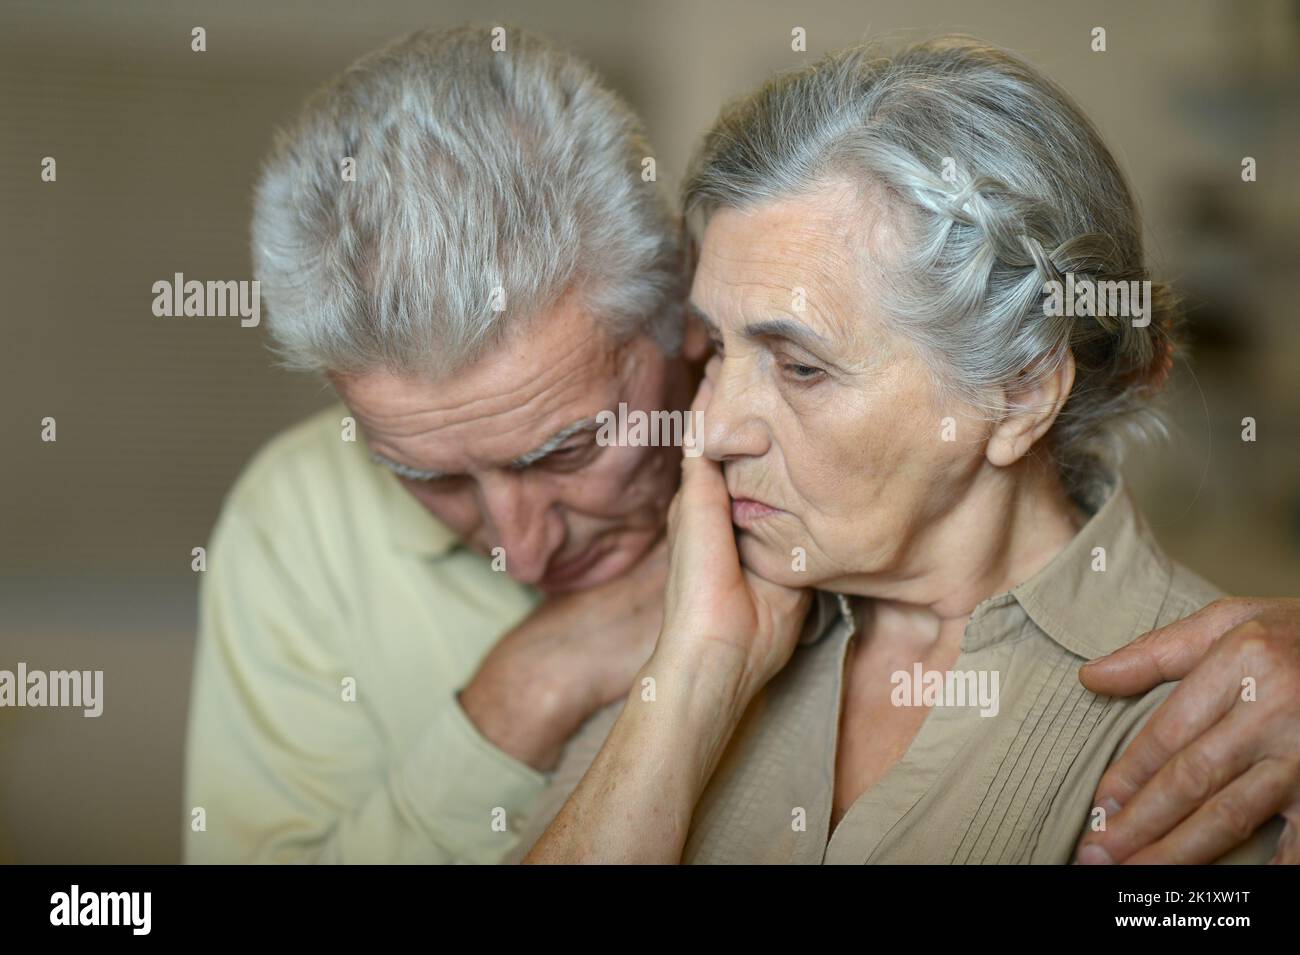 Portrait of a elderly couple being sad together Stock Photo